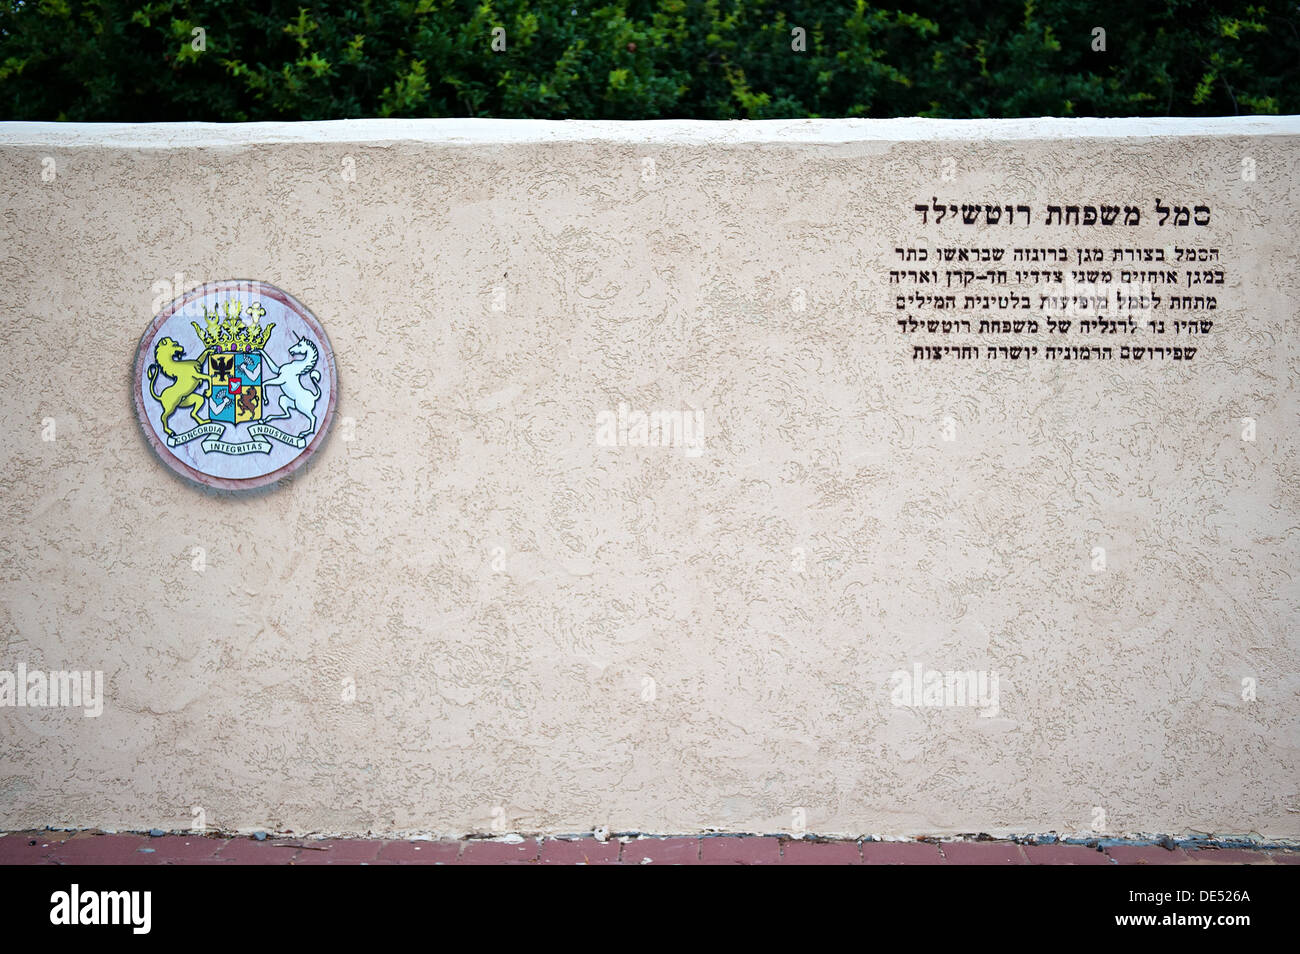 The outside wall of the 'Baron's Garden' dedicated to Baron Edmond De Rothschild & his family crest, at Mazkeret Batya  Israel Stock Photo